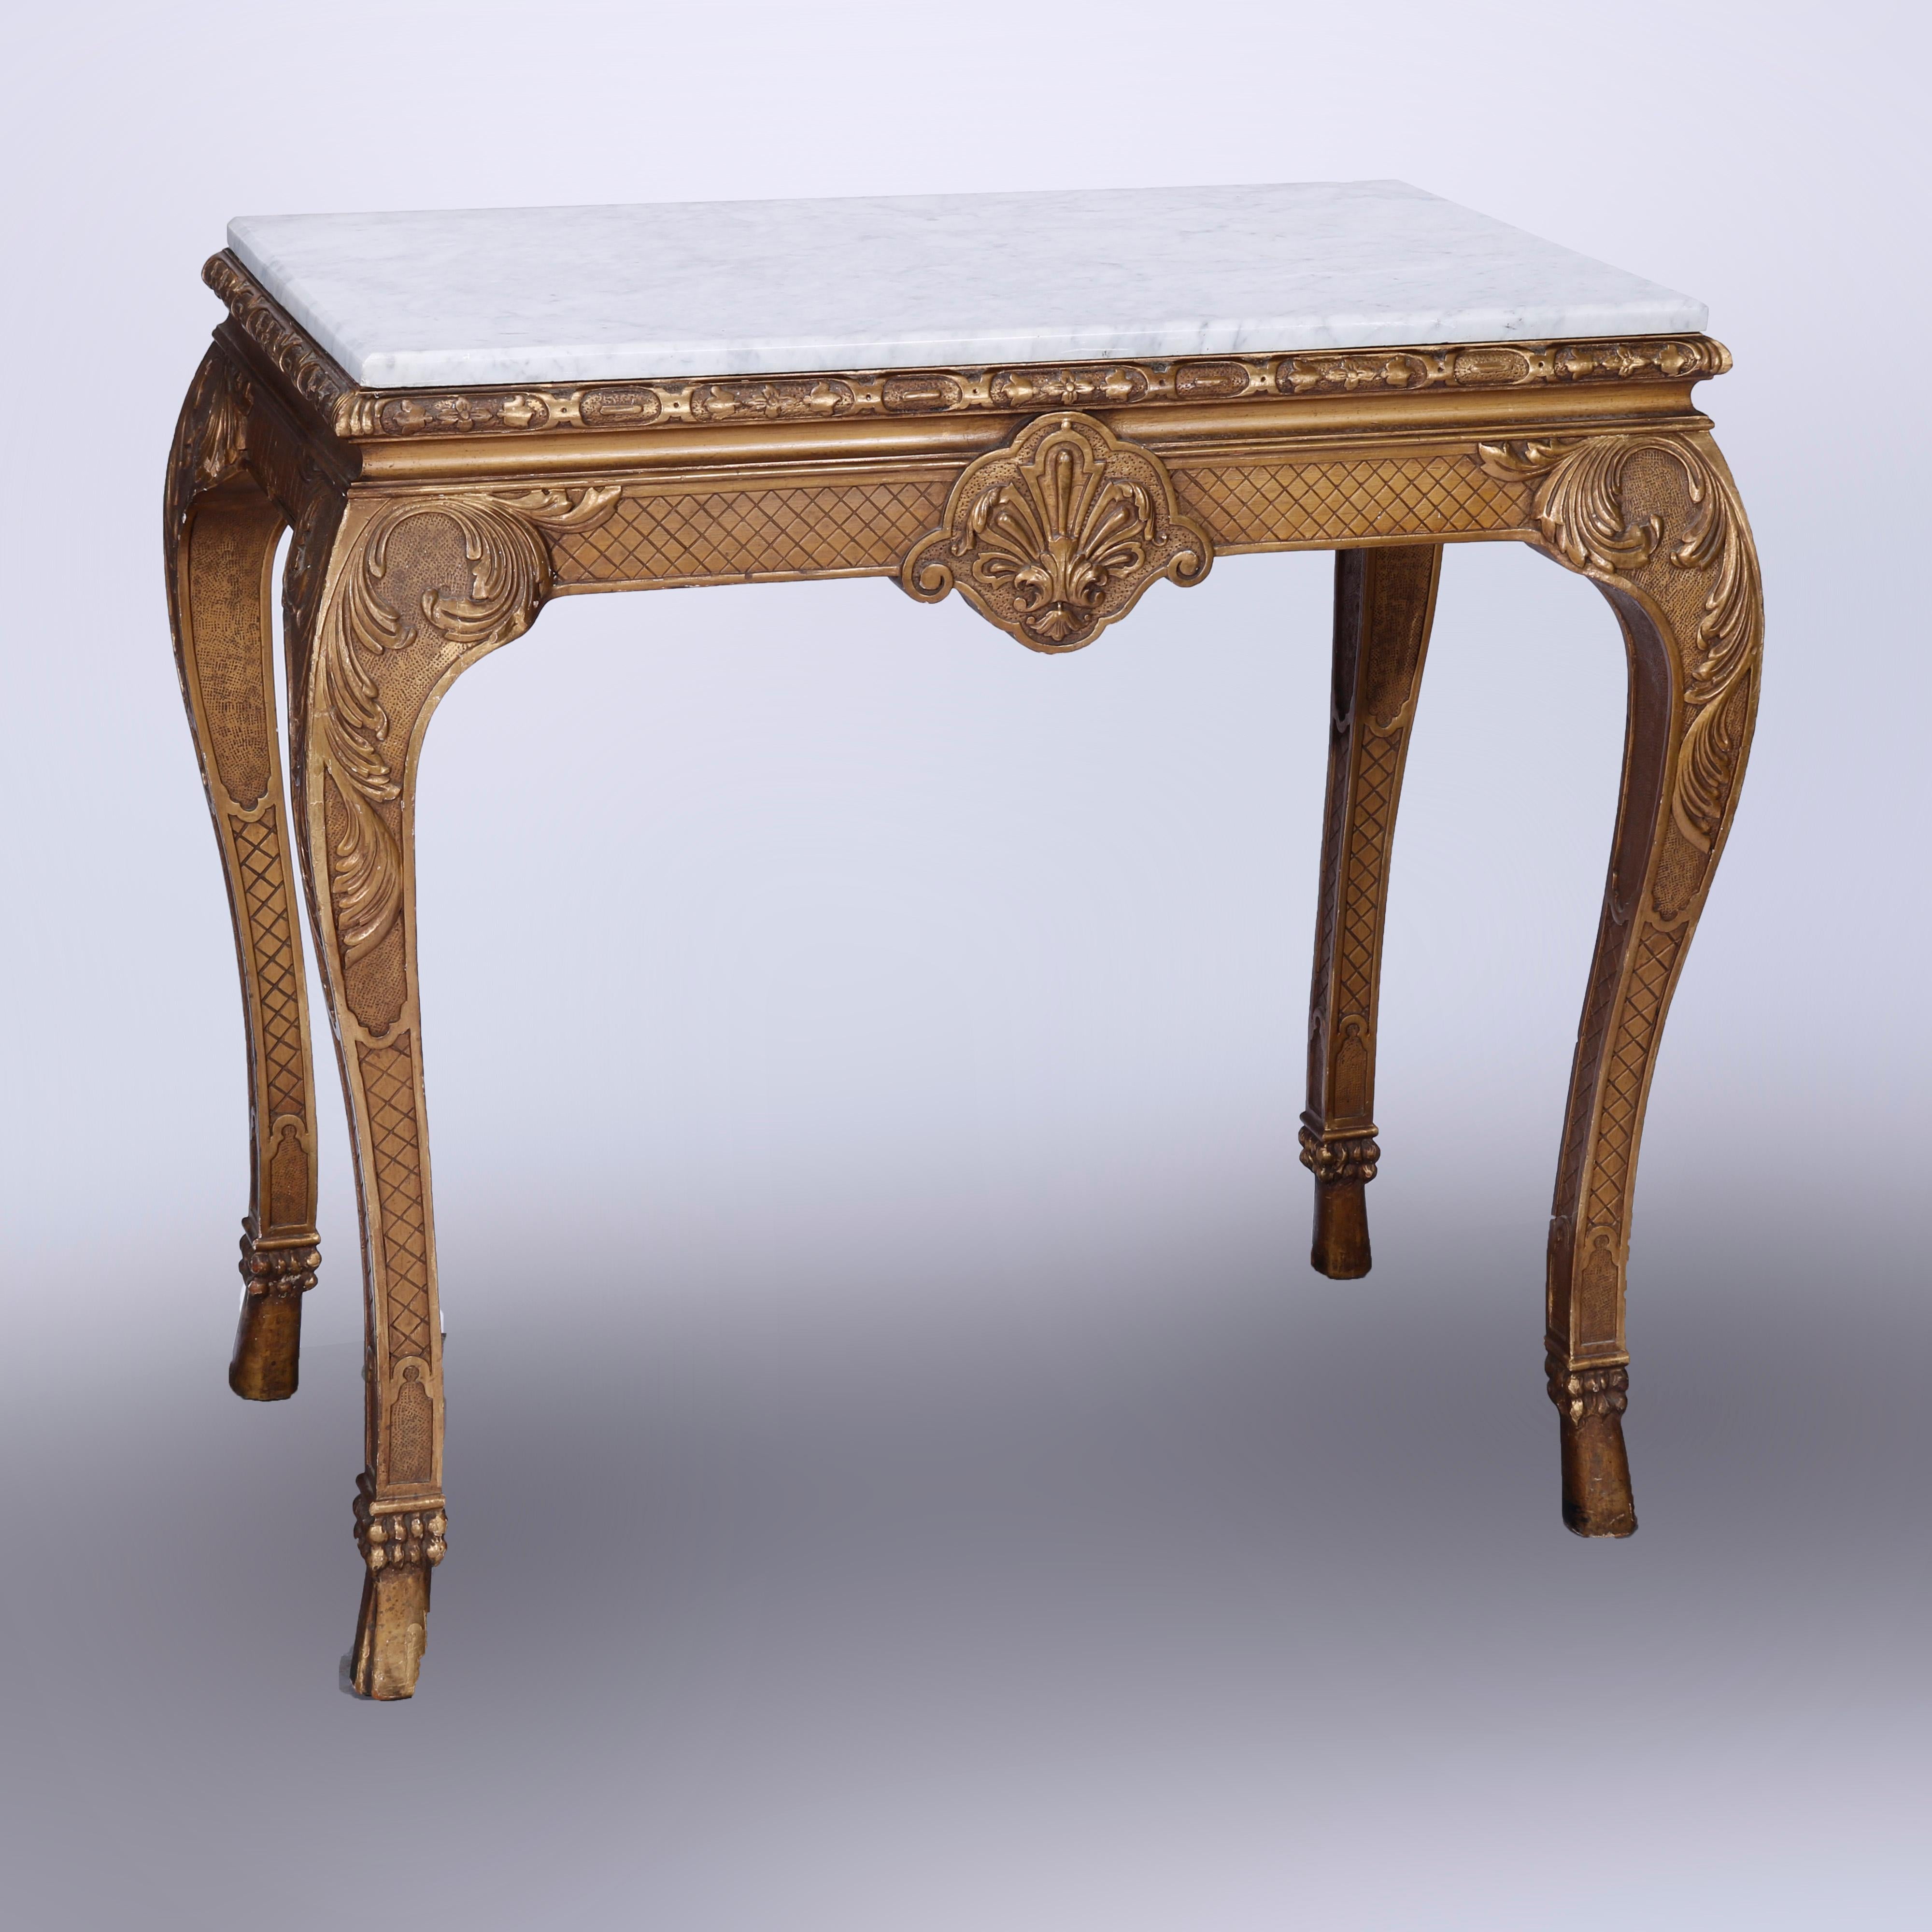 An antique French Louis XV style console table offers marble top over giltwood frame base having incised lattice design, central carved shell, raised on cabriole legs with acanthus knees terminating in stylized hoof feet, 19th century

Measures -